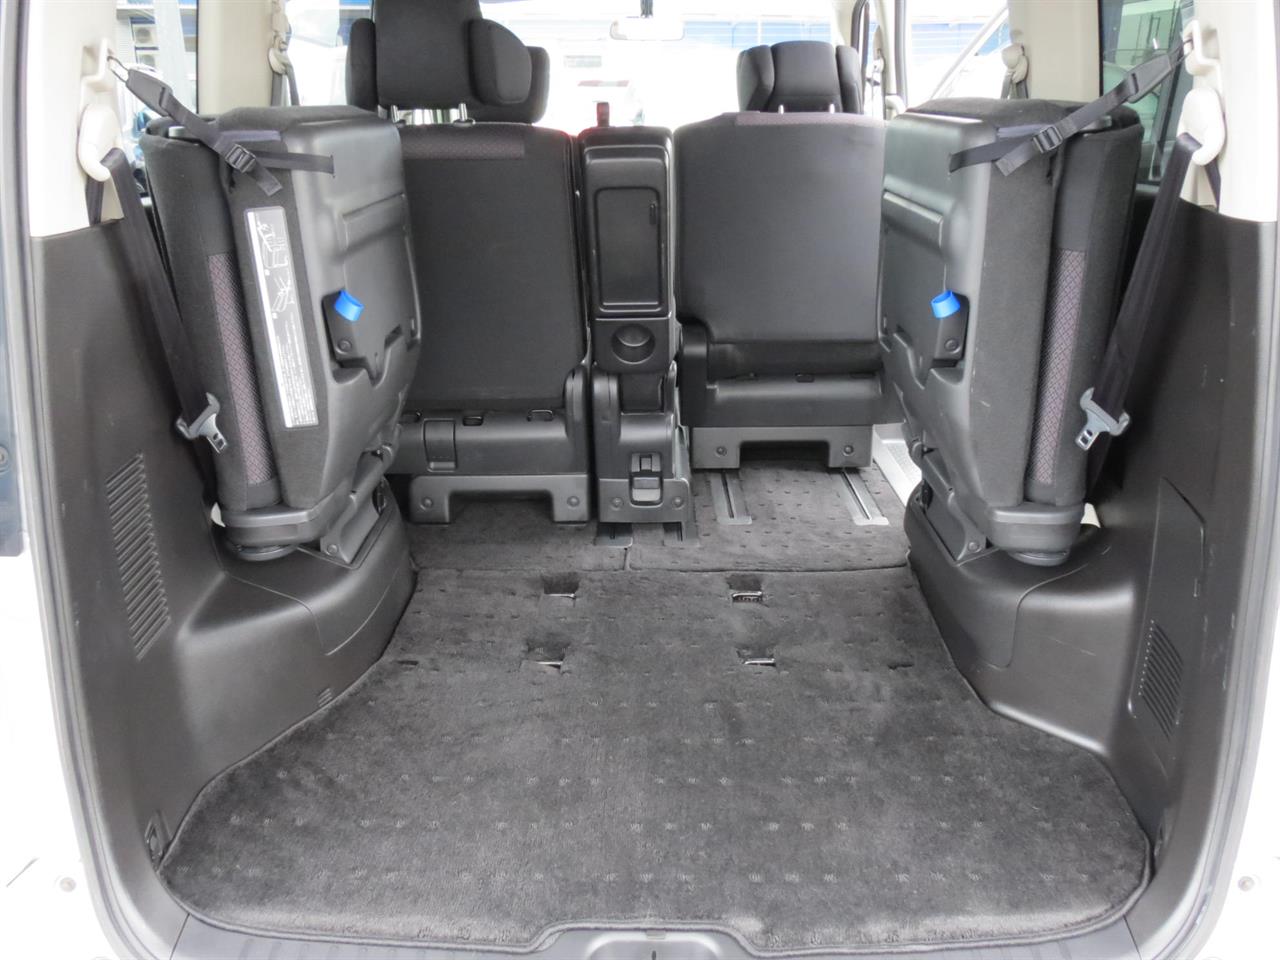 2013 Nissan Serena only $47 weekly